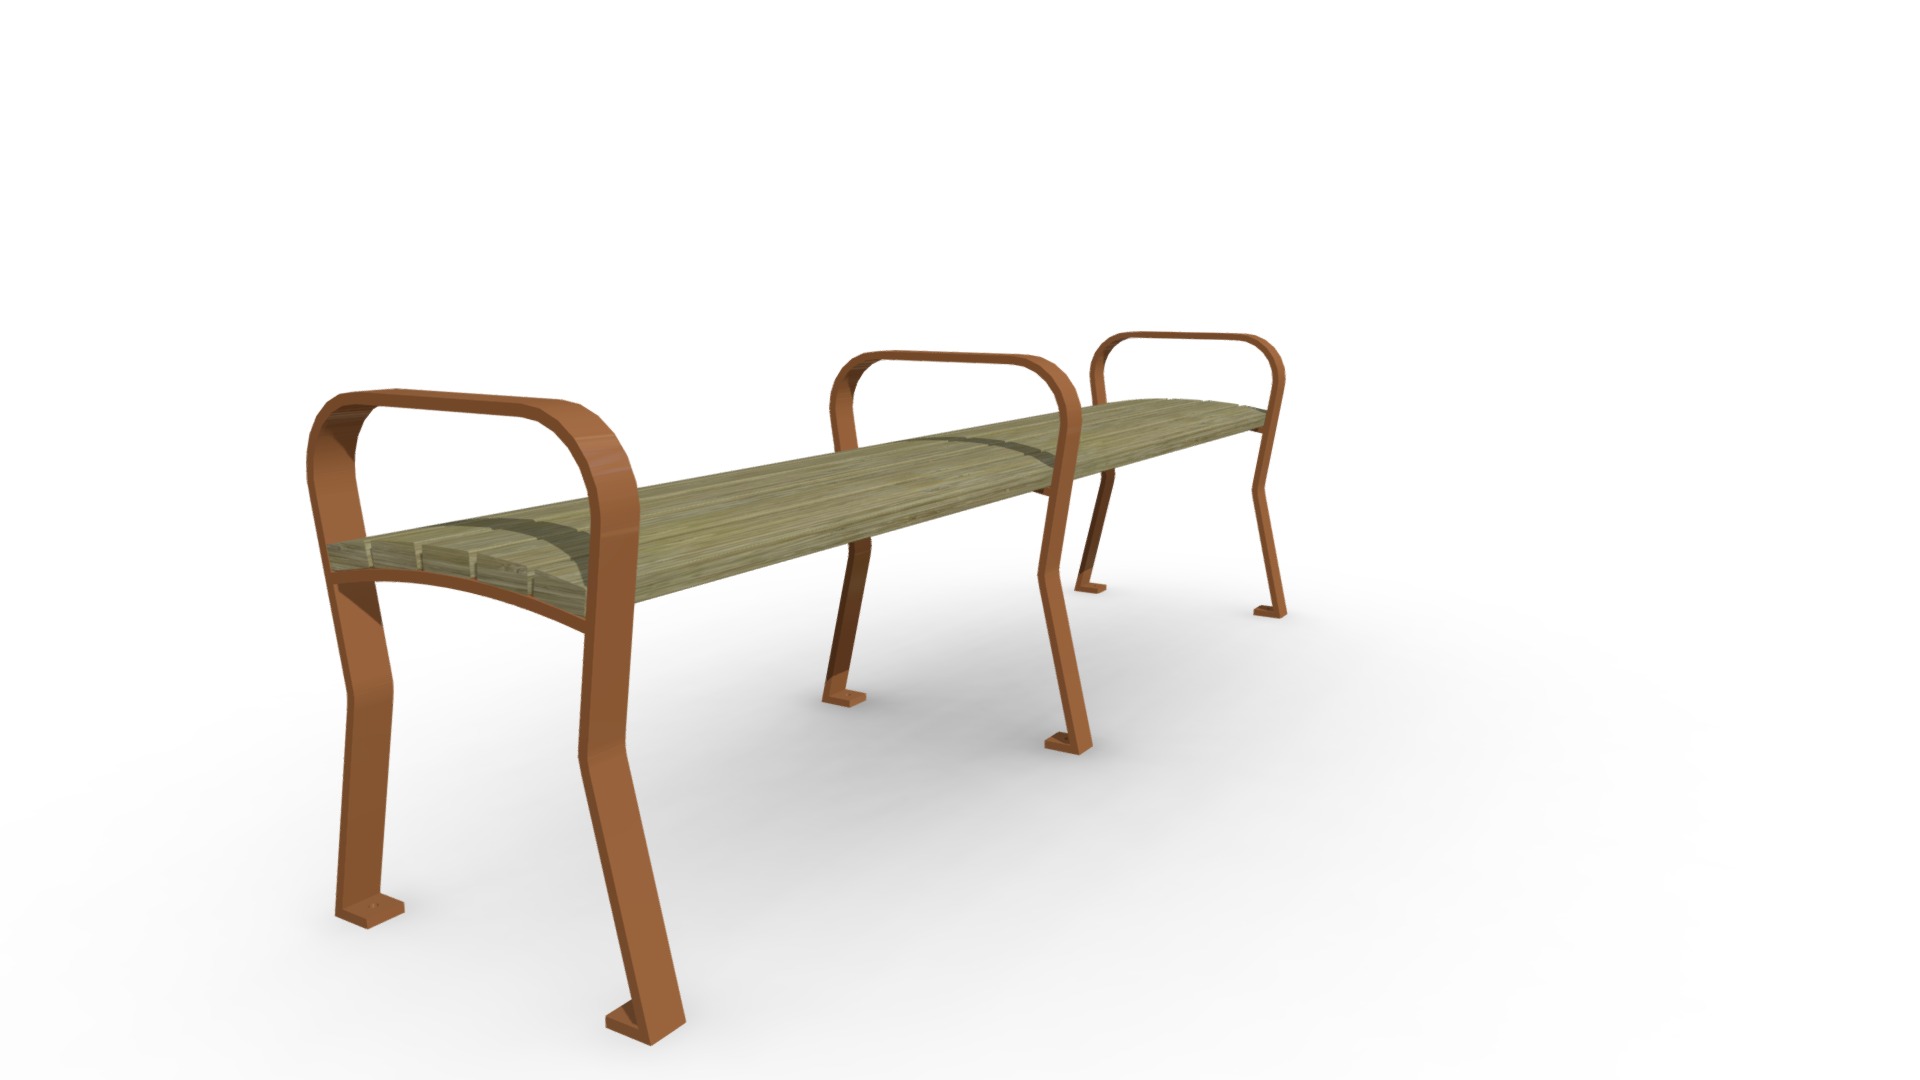 3D model SC-08.2,0 - This is a 3D model of the SC-08.2,0. The 3D model is about a wooden chair with a cushion.